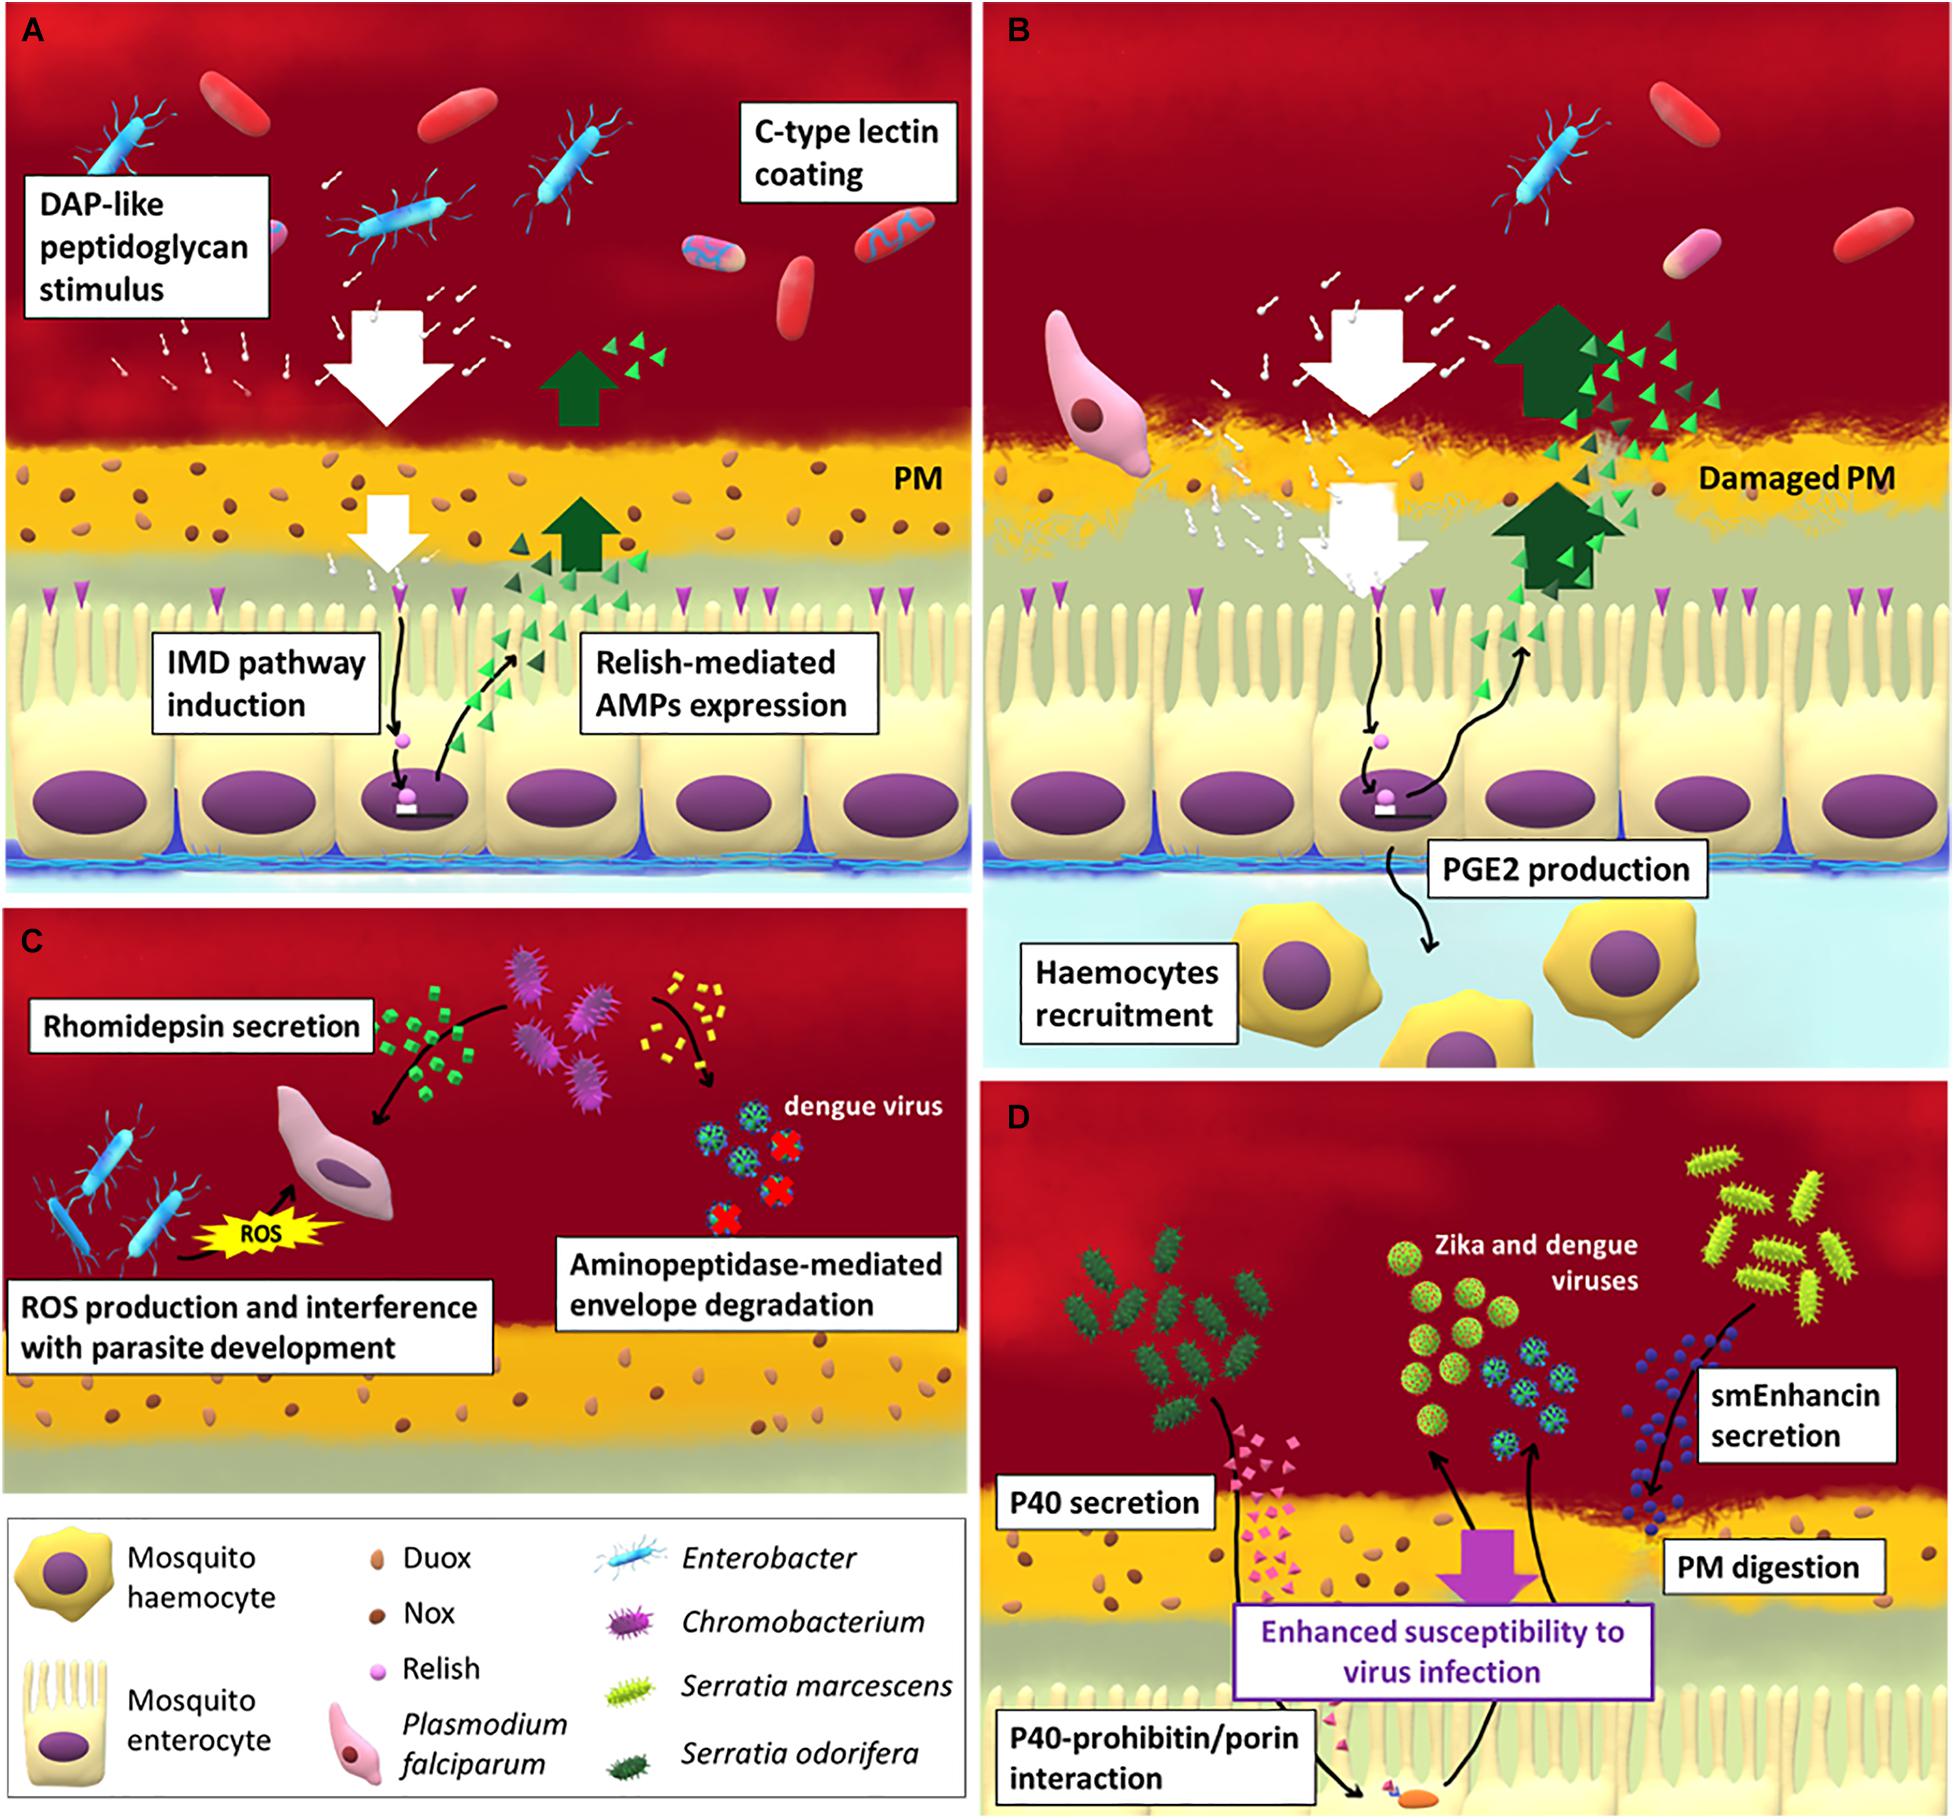 Frontiers | Mosquito Trilogy: Microbiota, Immunity and Pathogens